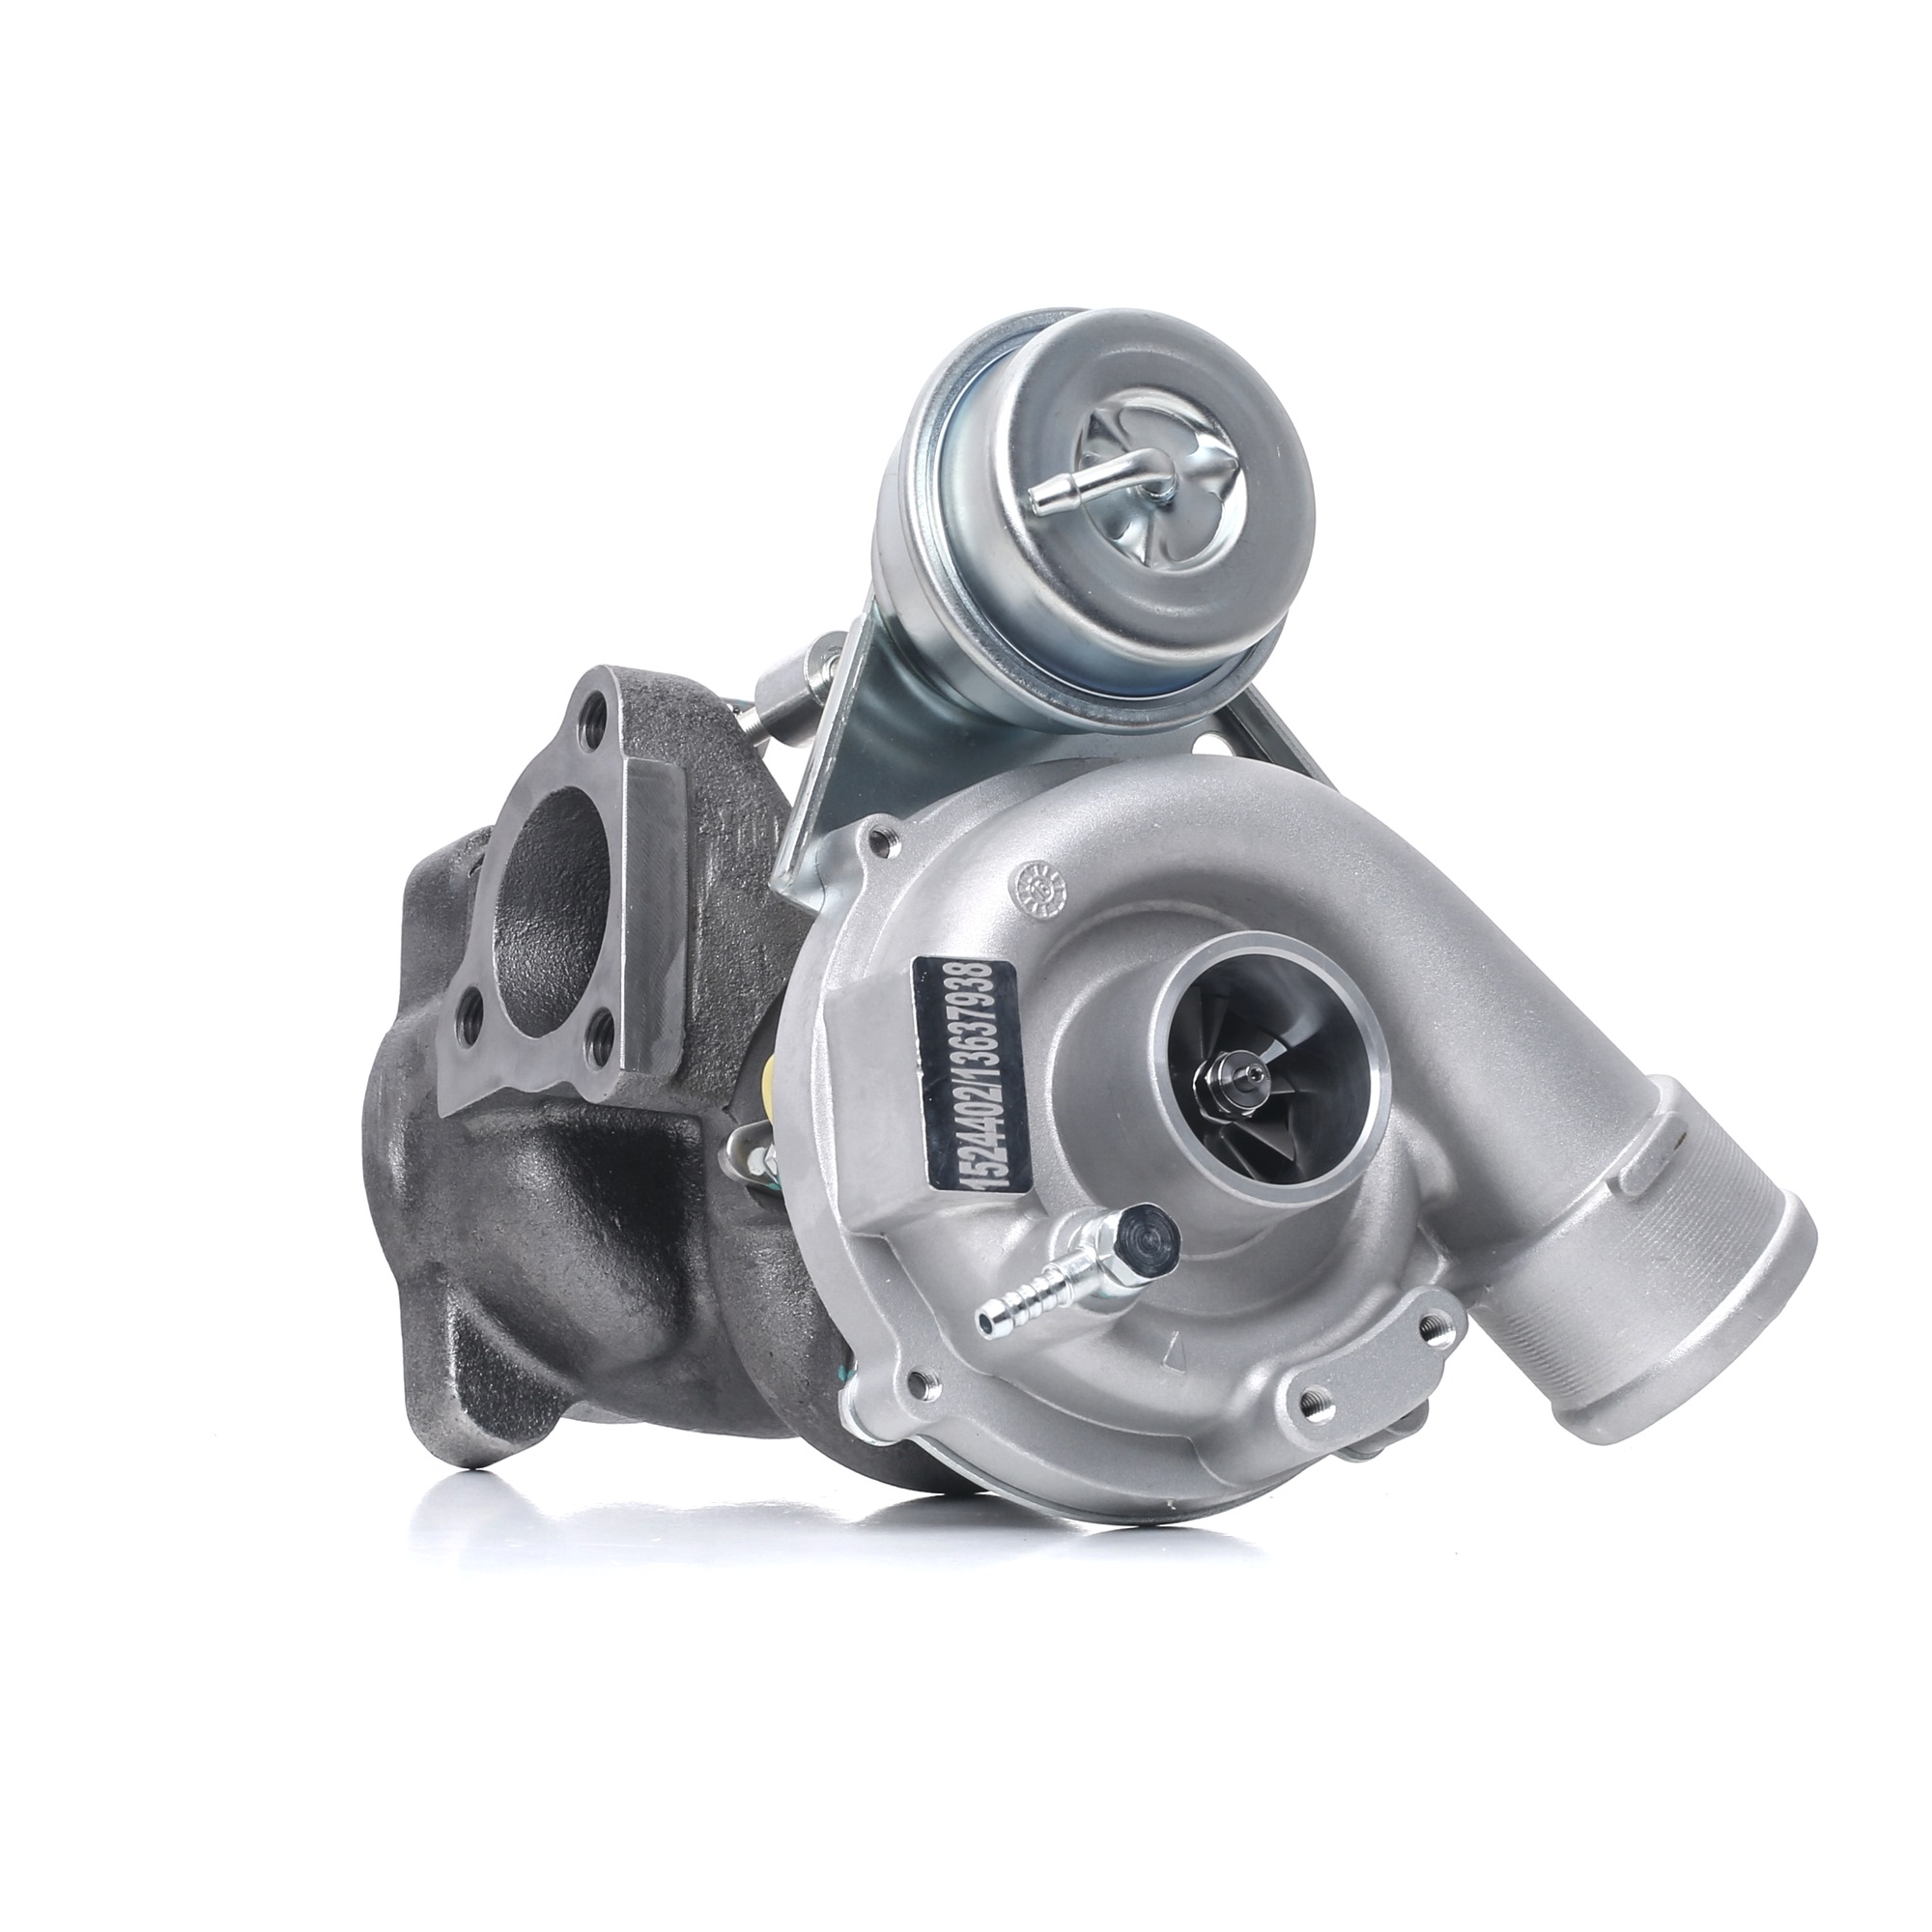 RIDEX 2234C0164 Turbocharger Exhaust Turbocharger, Pneumatic, Incl. Gasket Set, with attachment material